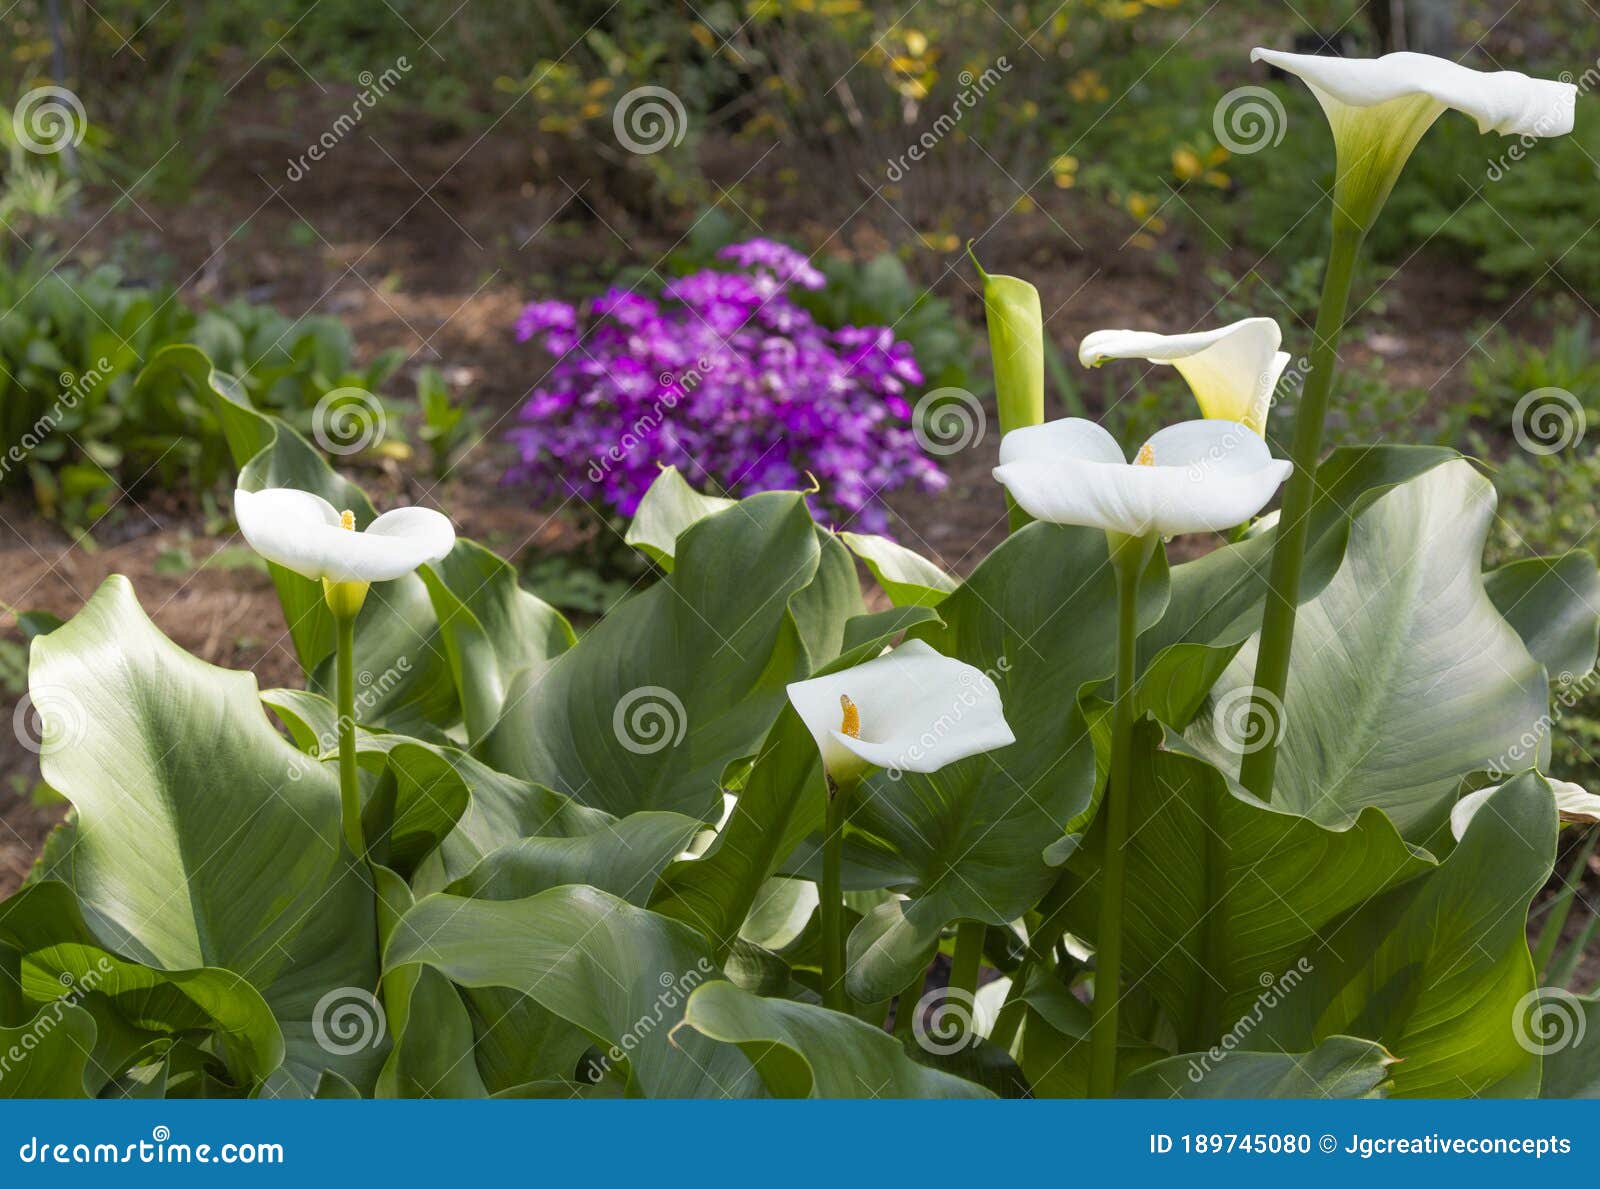 White Canna Lilies in Colorful Landscape Stock Photo - Image of closeup ...